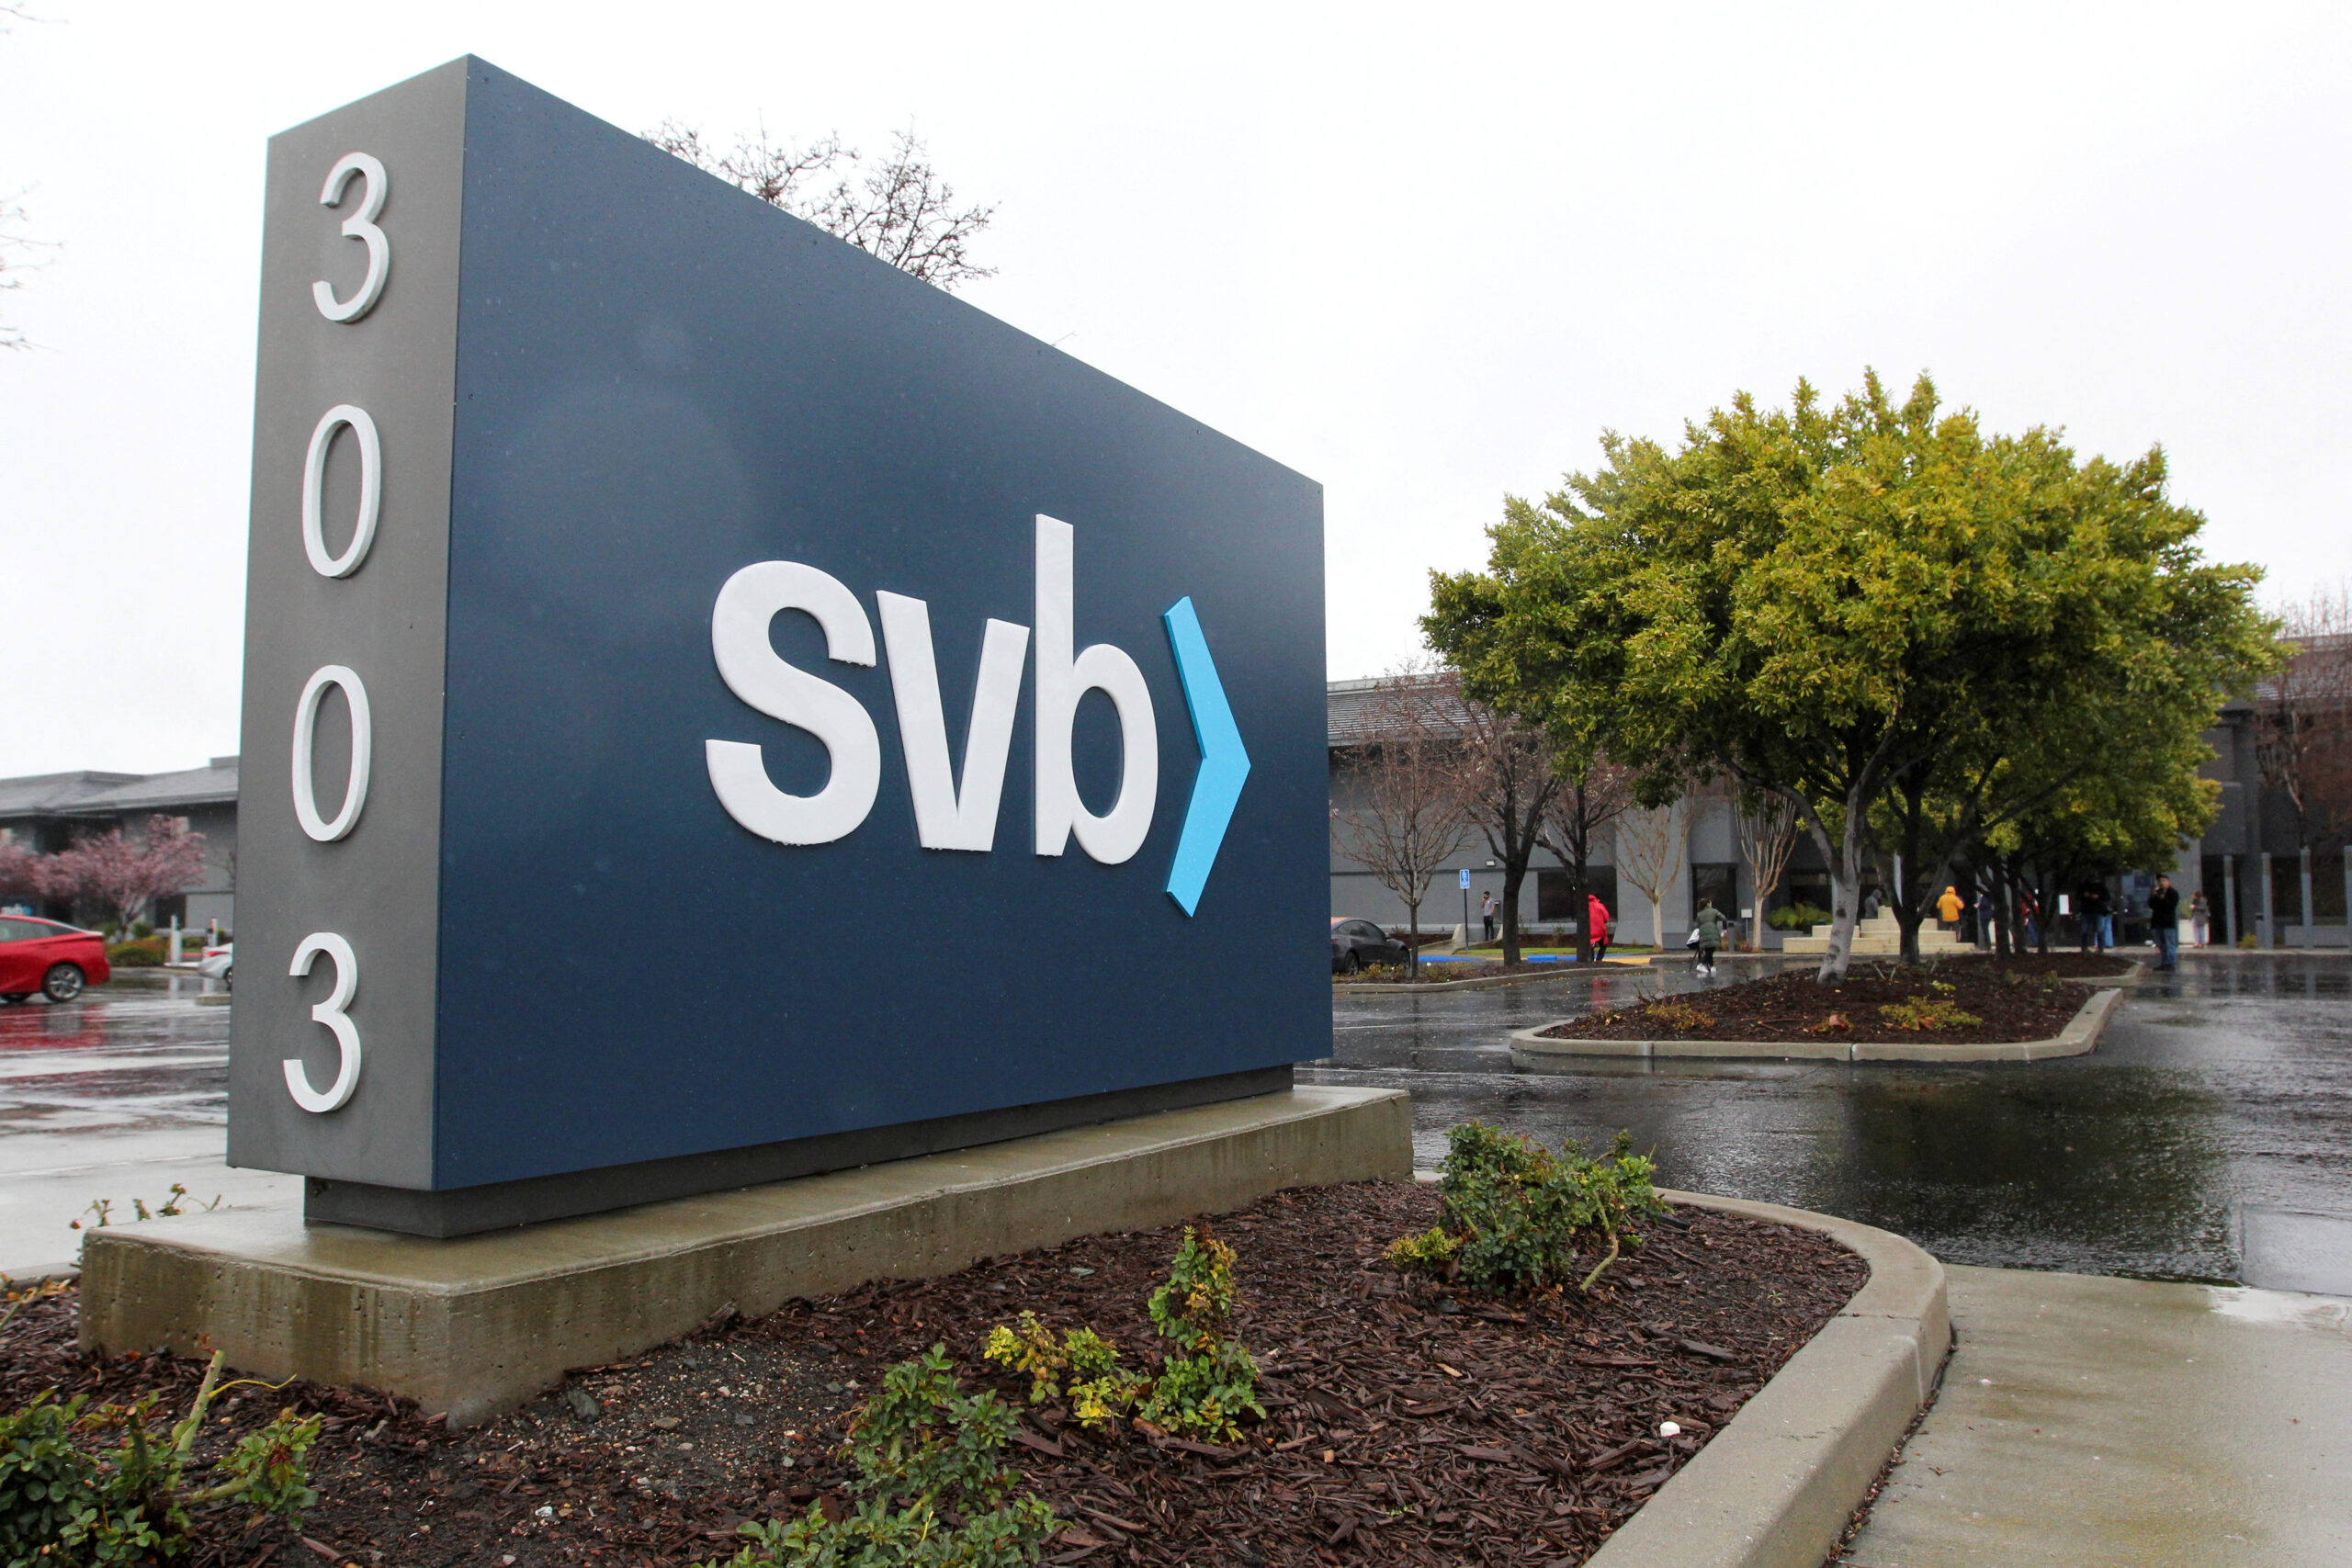 A sign for Silicon Valley Bank. The sign is blue with the bank's lower-cased "svb" logo.